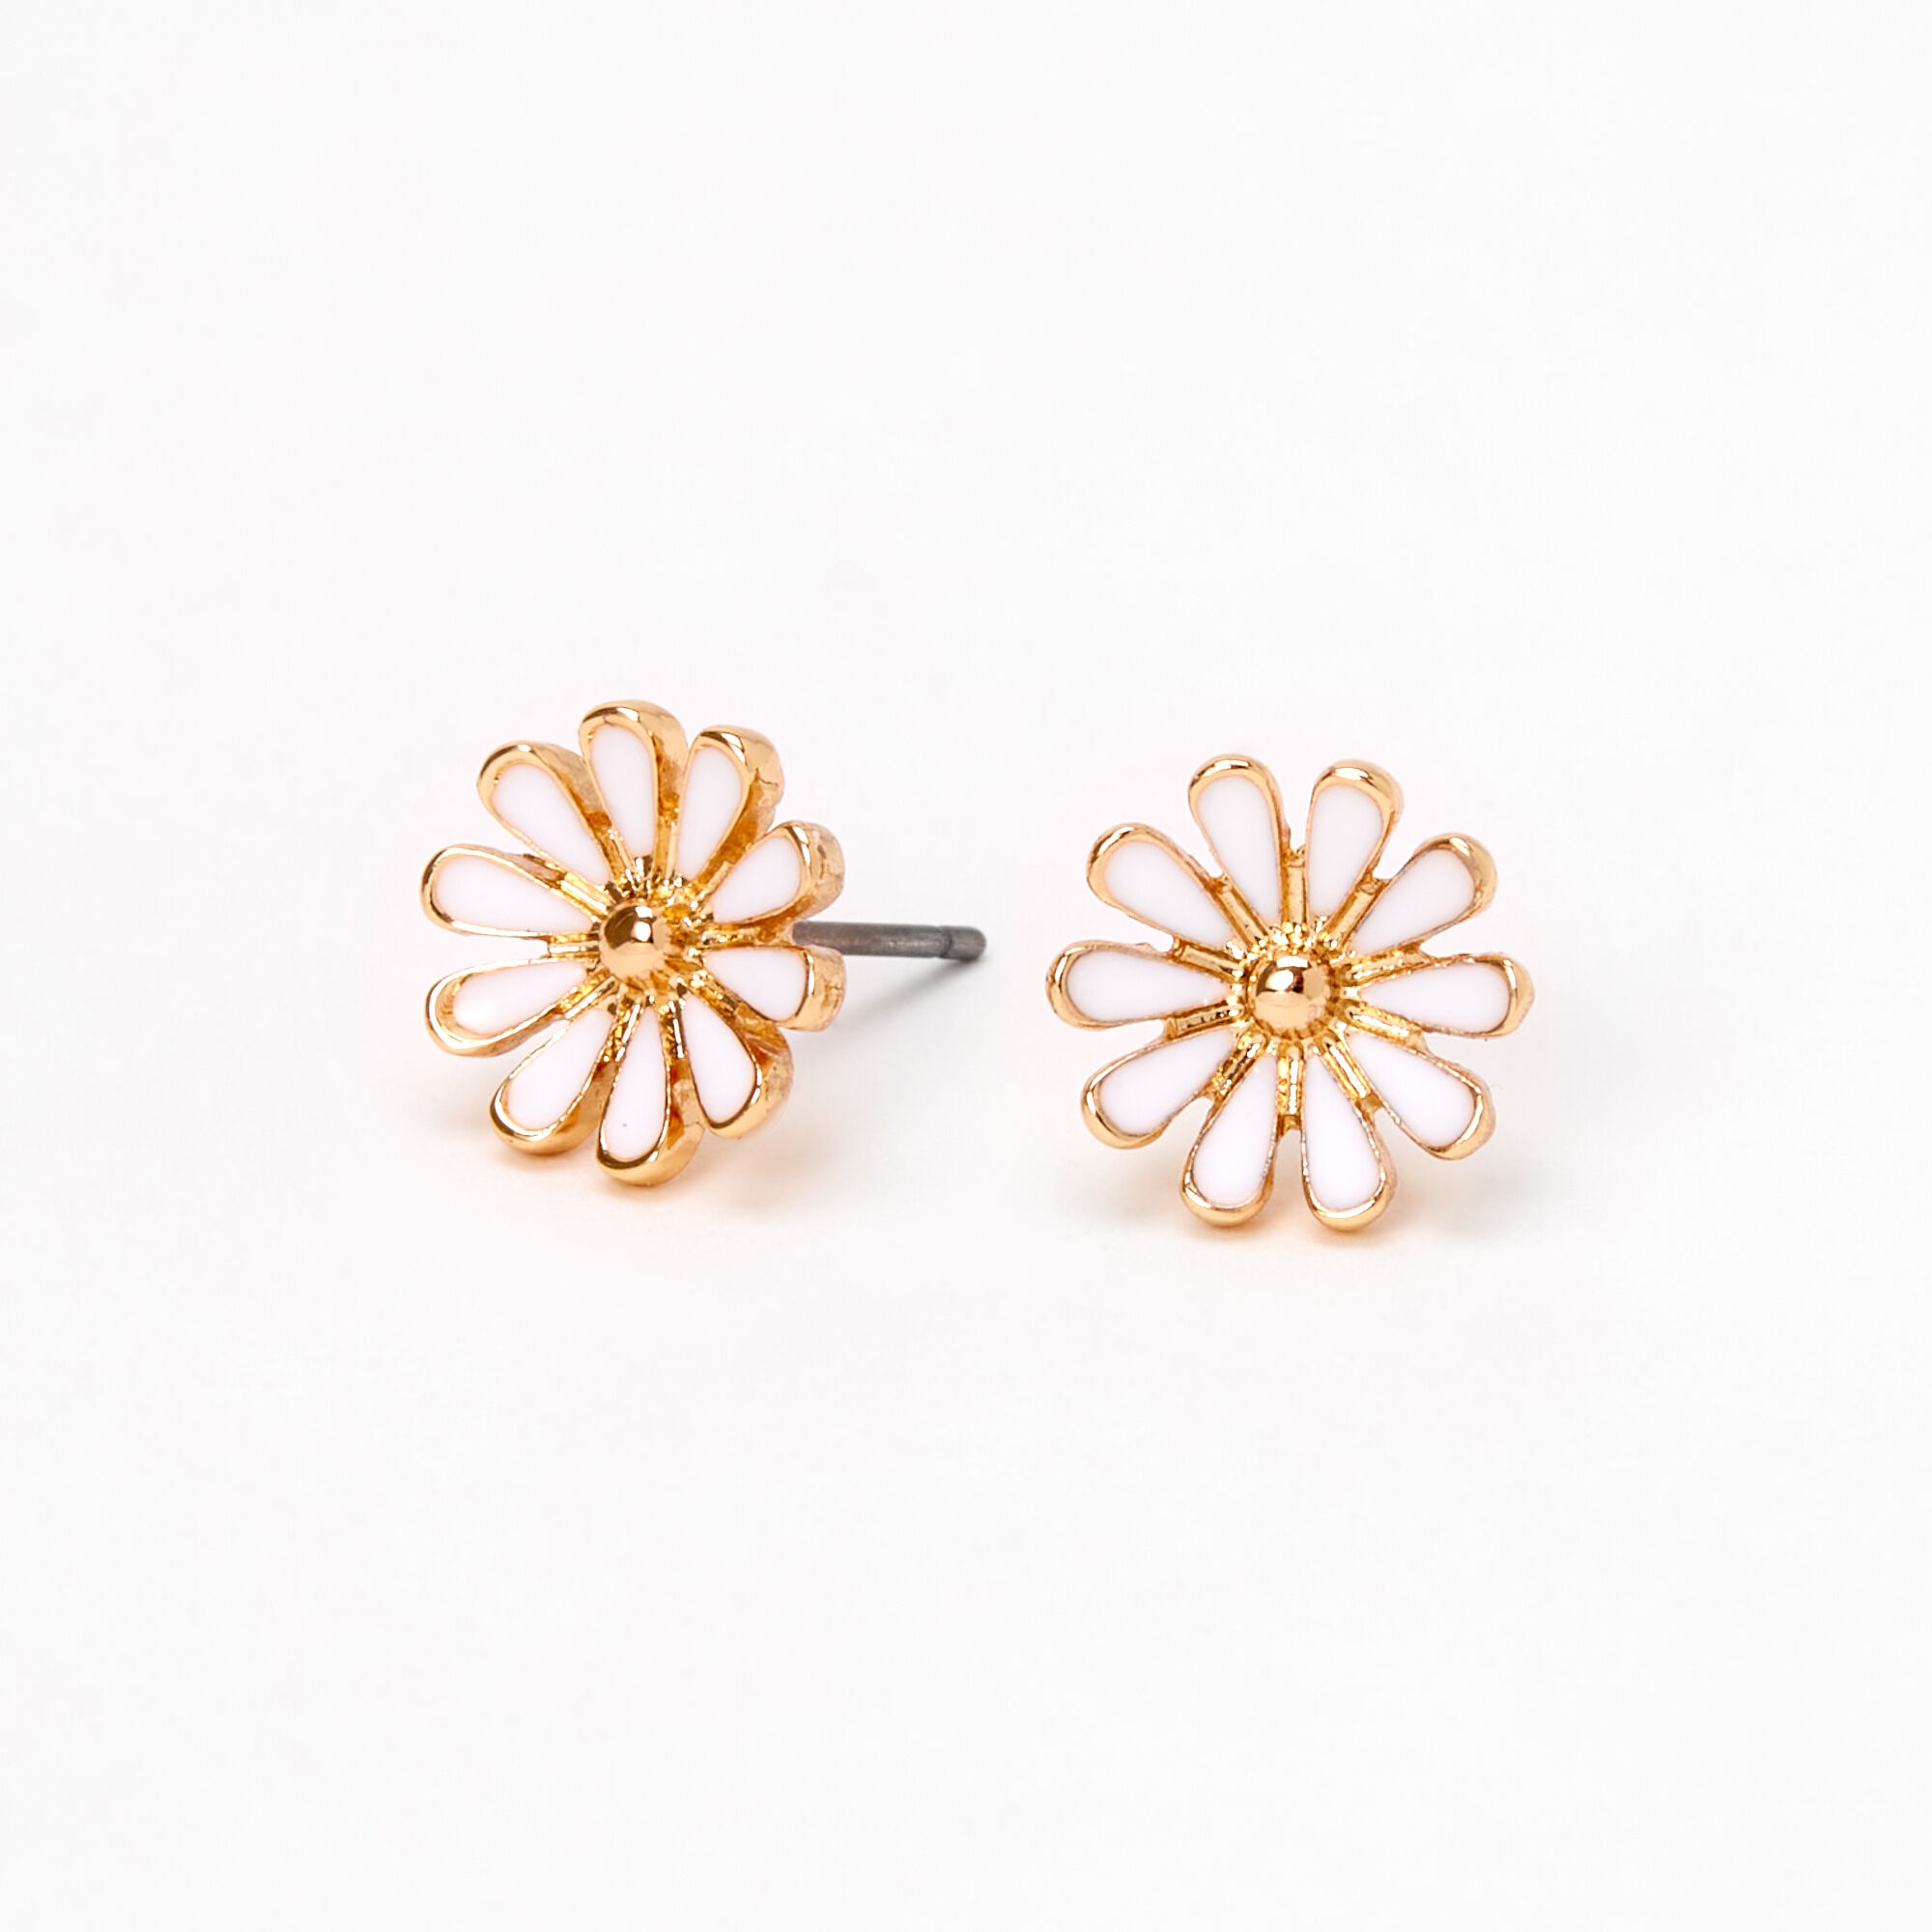 View Claires Gold Daisy Flower Stud Earrings White information